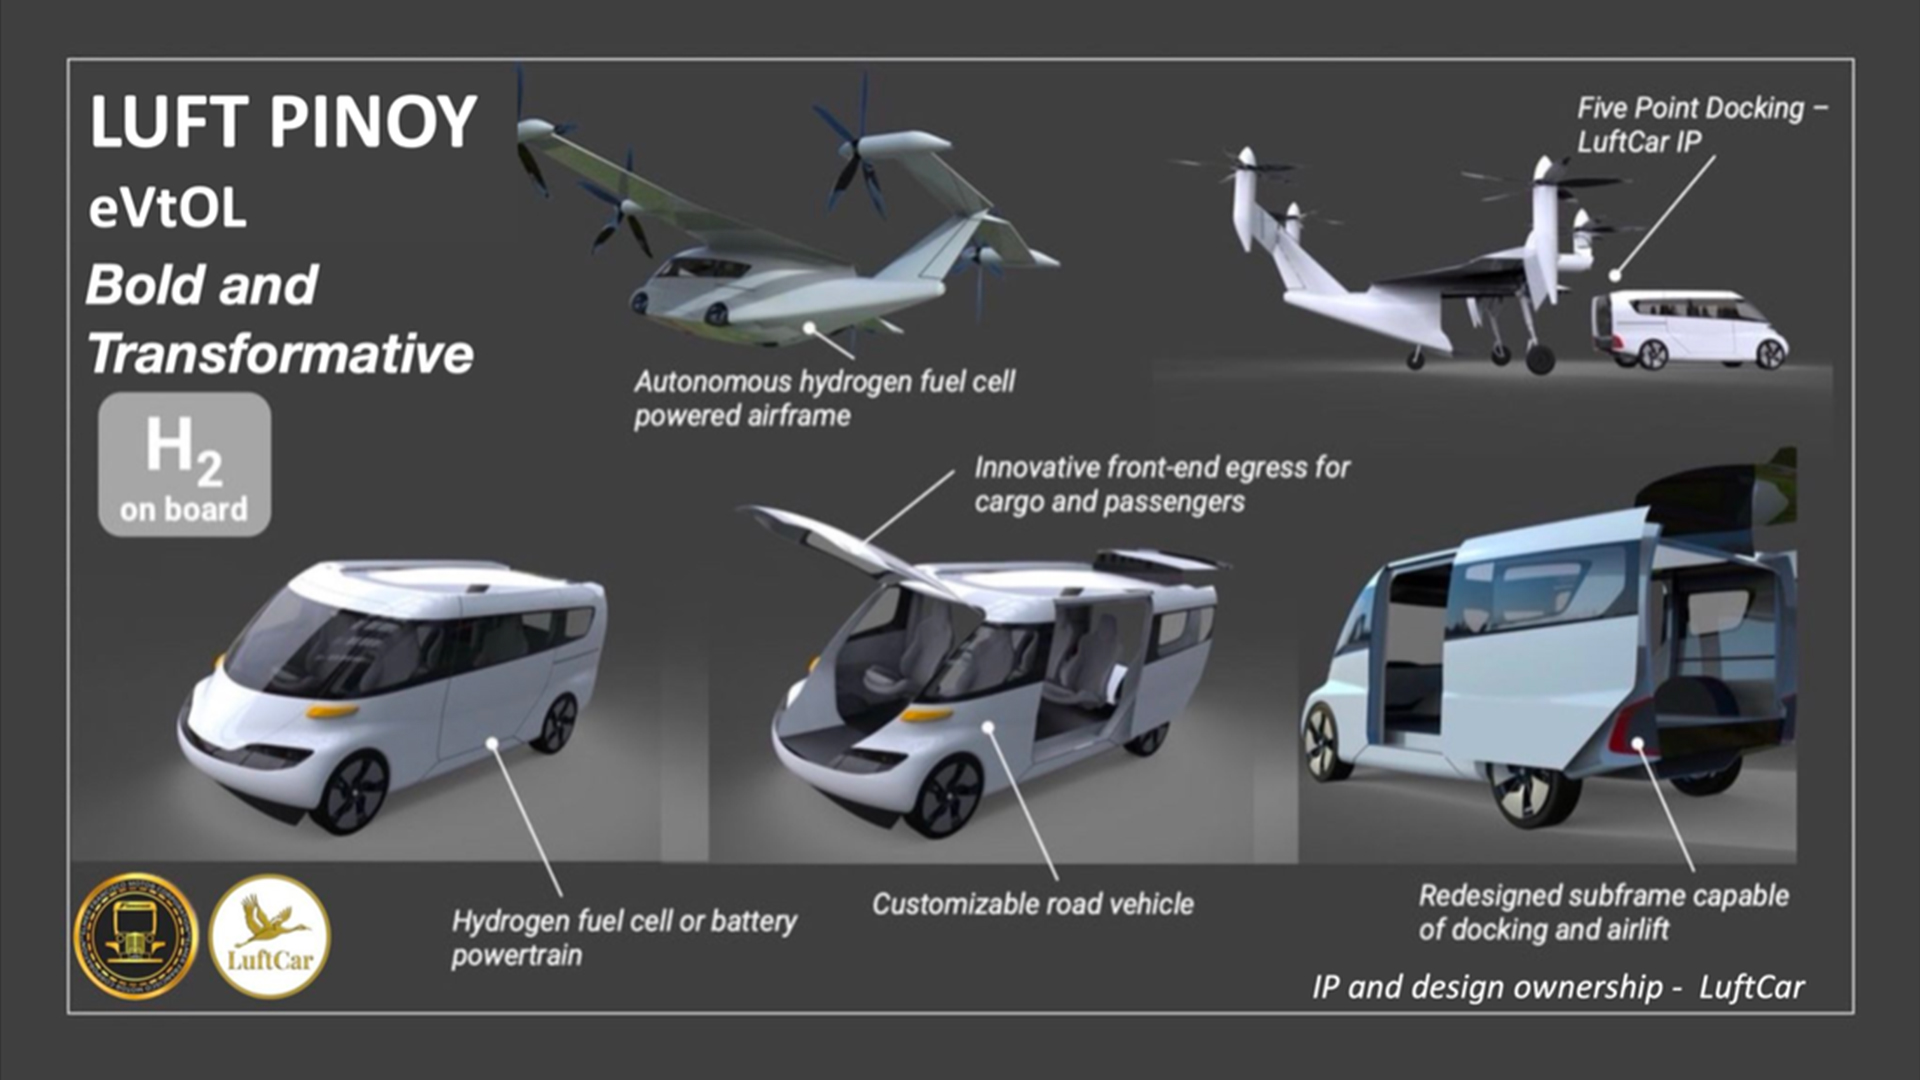 New flying car concept by LuftCar.